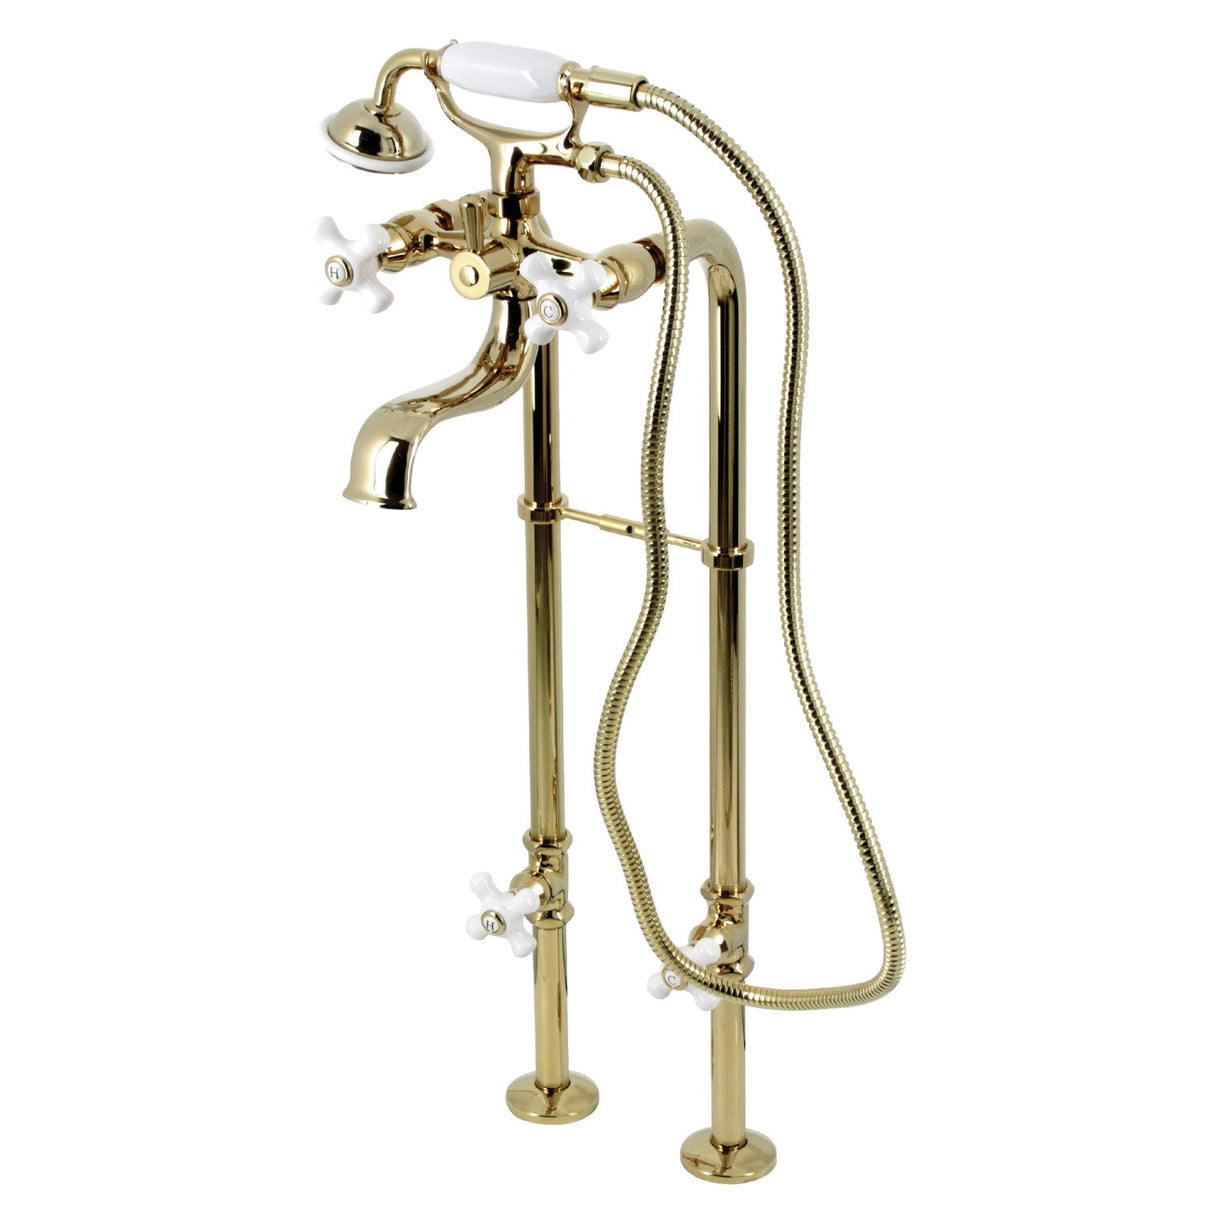 Kingston CCK226PXK2 Three-Handle 2-Hole Freestanding Clawfoot Tub Faucet Package with Supply Line and Stop Valve, Polished Brass